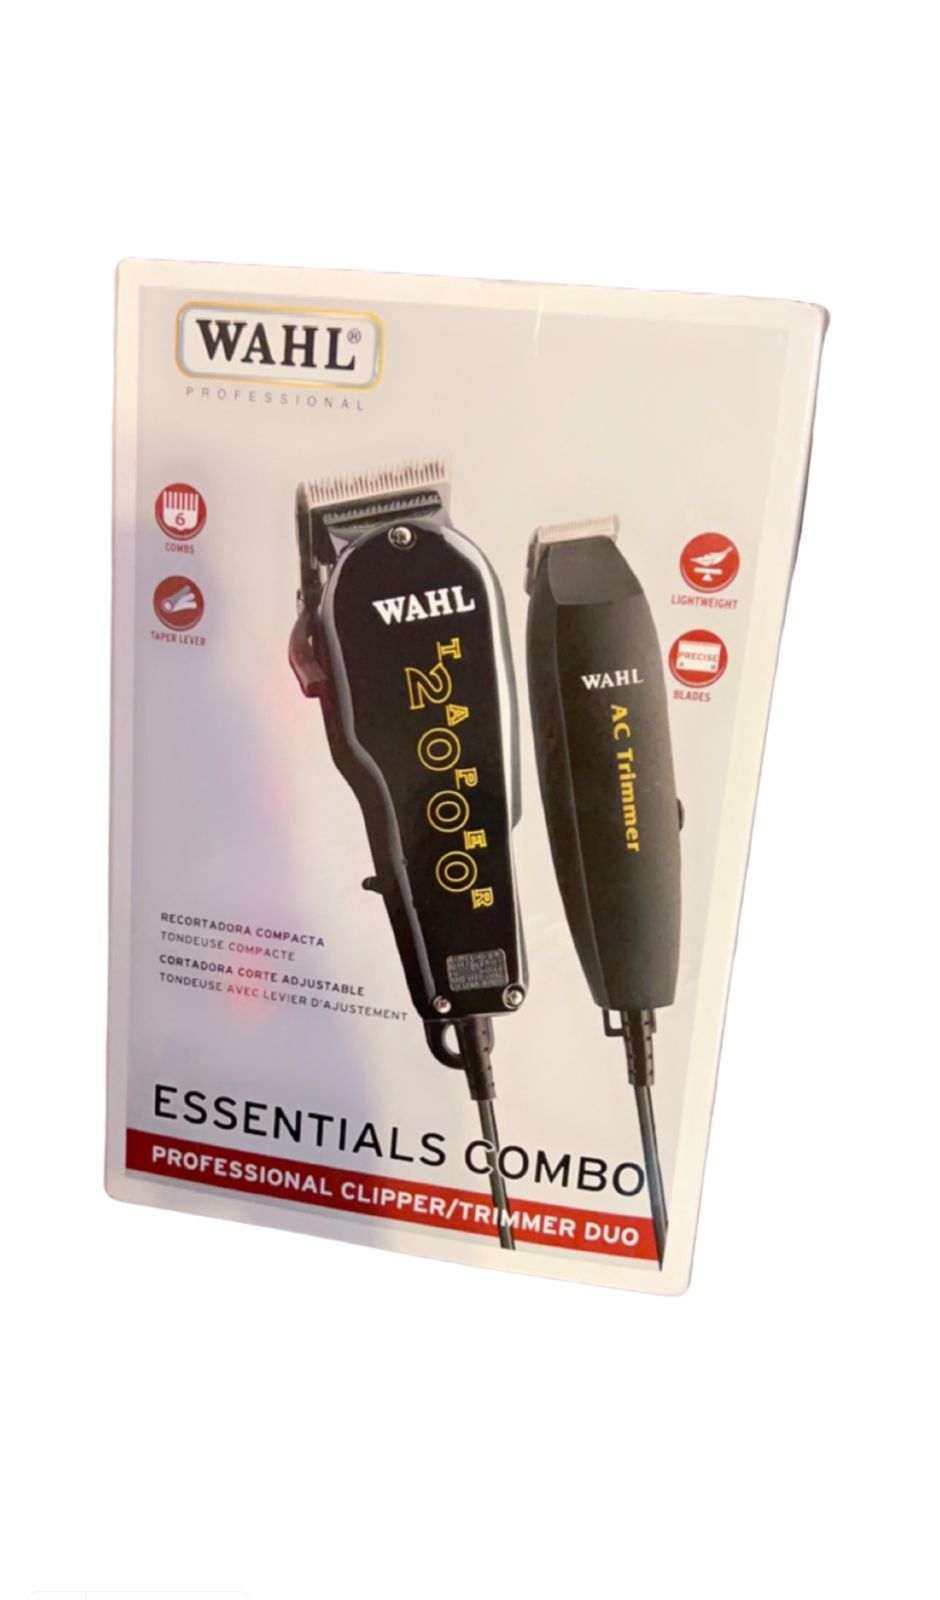 Wahl Professional Essentials Combo with Taper 2000 Clipper and AC Trimmer for Fading, Edging, and Blending For Beginning B... Wahl Professional Essentials